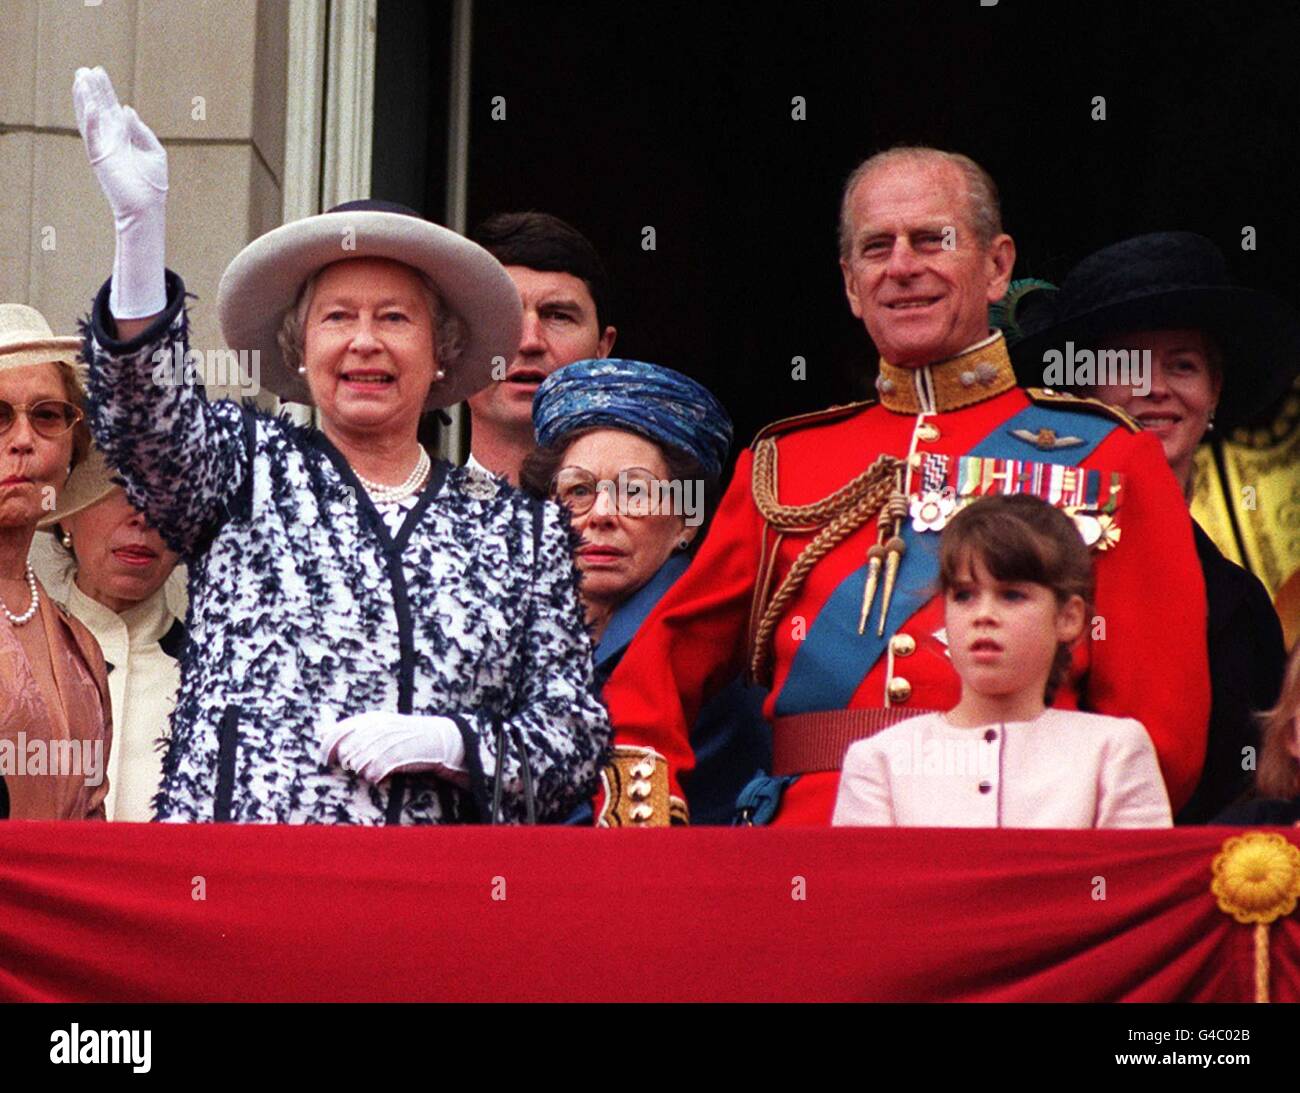 The Queen waves to the crowds as she stands on the balcony of Buckingham Palace with the Duke of Edinburgh and other members of the Royal Family after watching the traditional fly-past as part of the Trooping of the Colour in honour of the Her official birthday today (Saturday). Left to right: The Queen, Tim Laurence (Princess Anne's husband) Princess Margaret (wearing blue hat), The Duke of Edinburgh, Princess Eugenie (pink dress), Lady Helen Taylor (dressed in black), unidentified young girl and The Duke of Kent. See PA story ROYAL Trooping. WPA rota picture by John Stillwell/PA Stock Photo